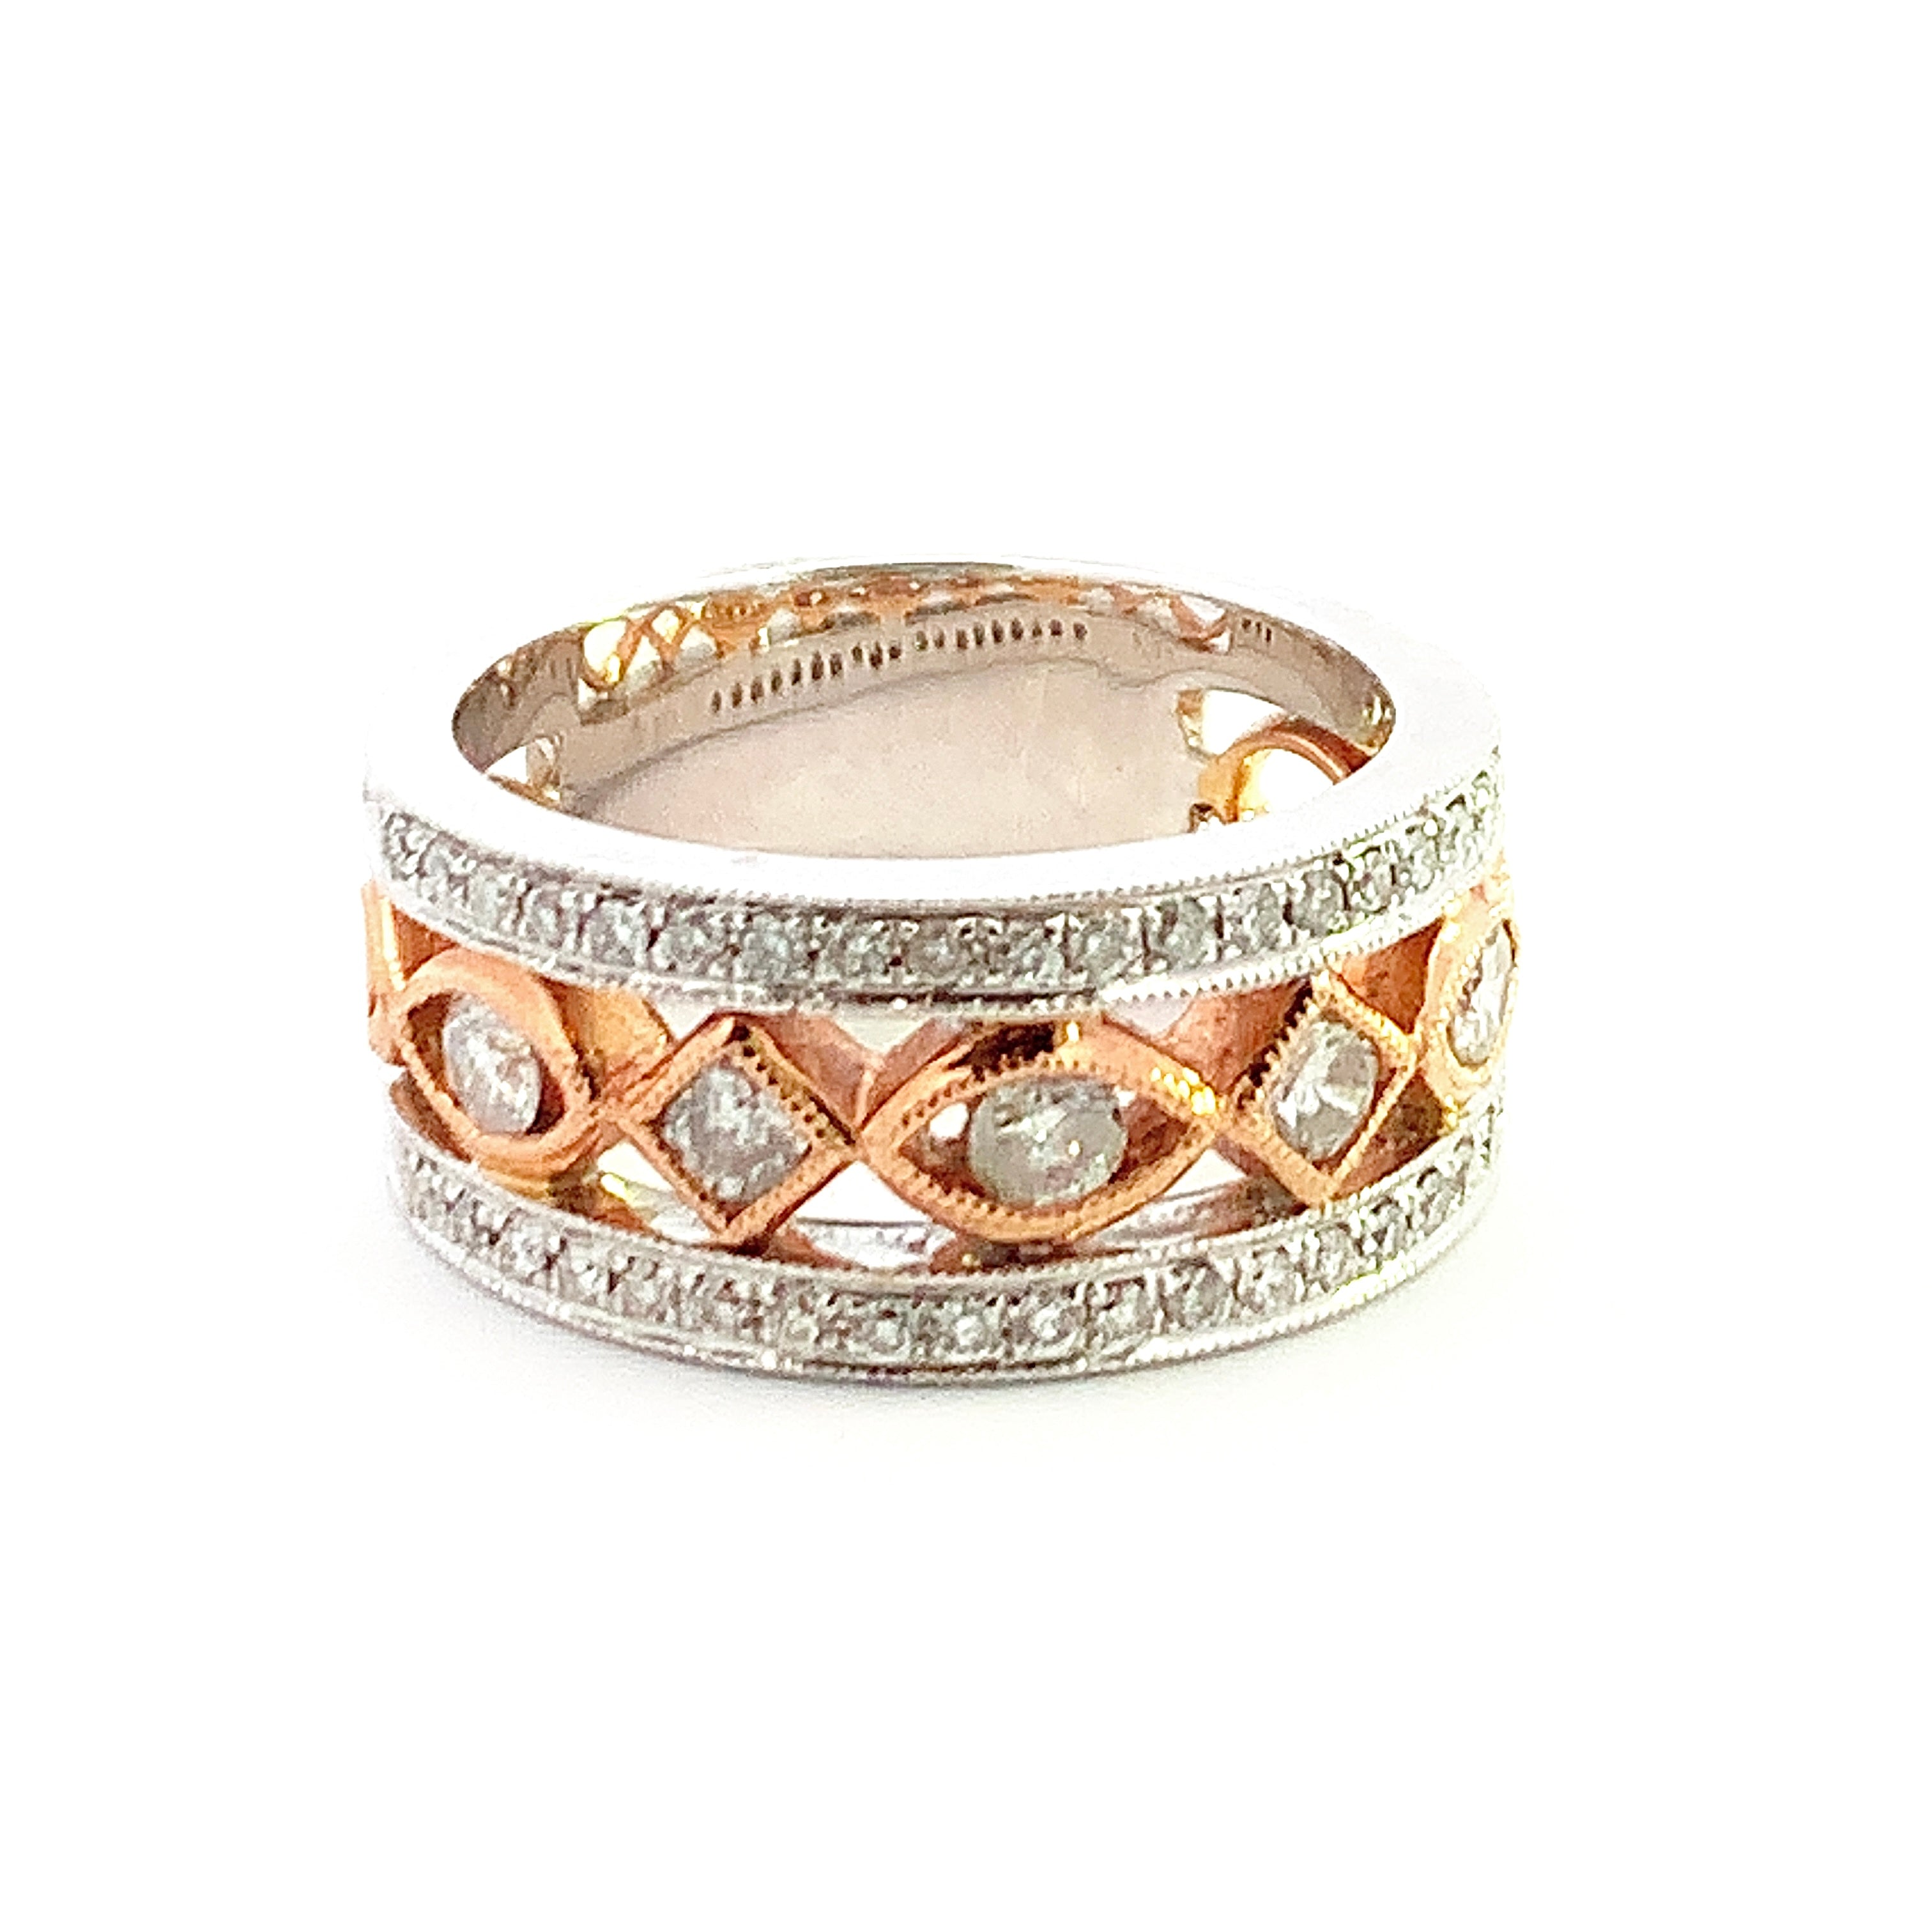 The Intricate Two-Tone Ring- 65% OFF!